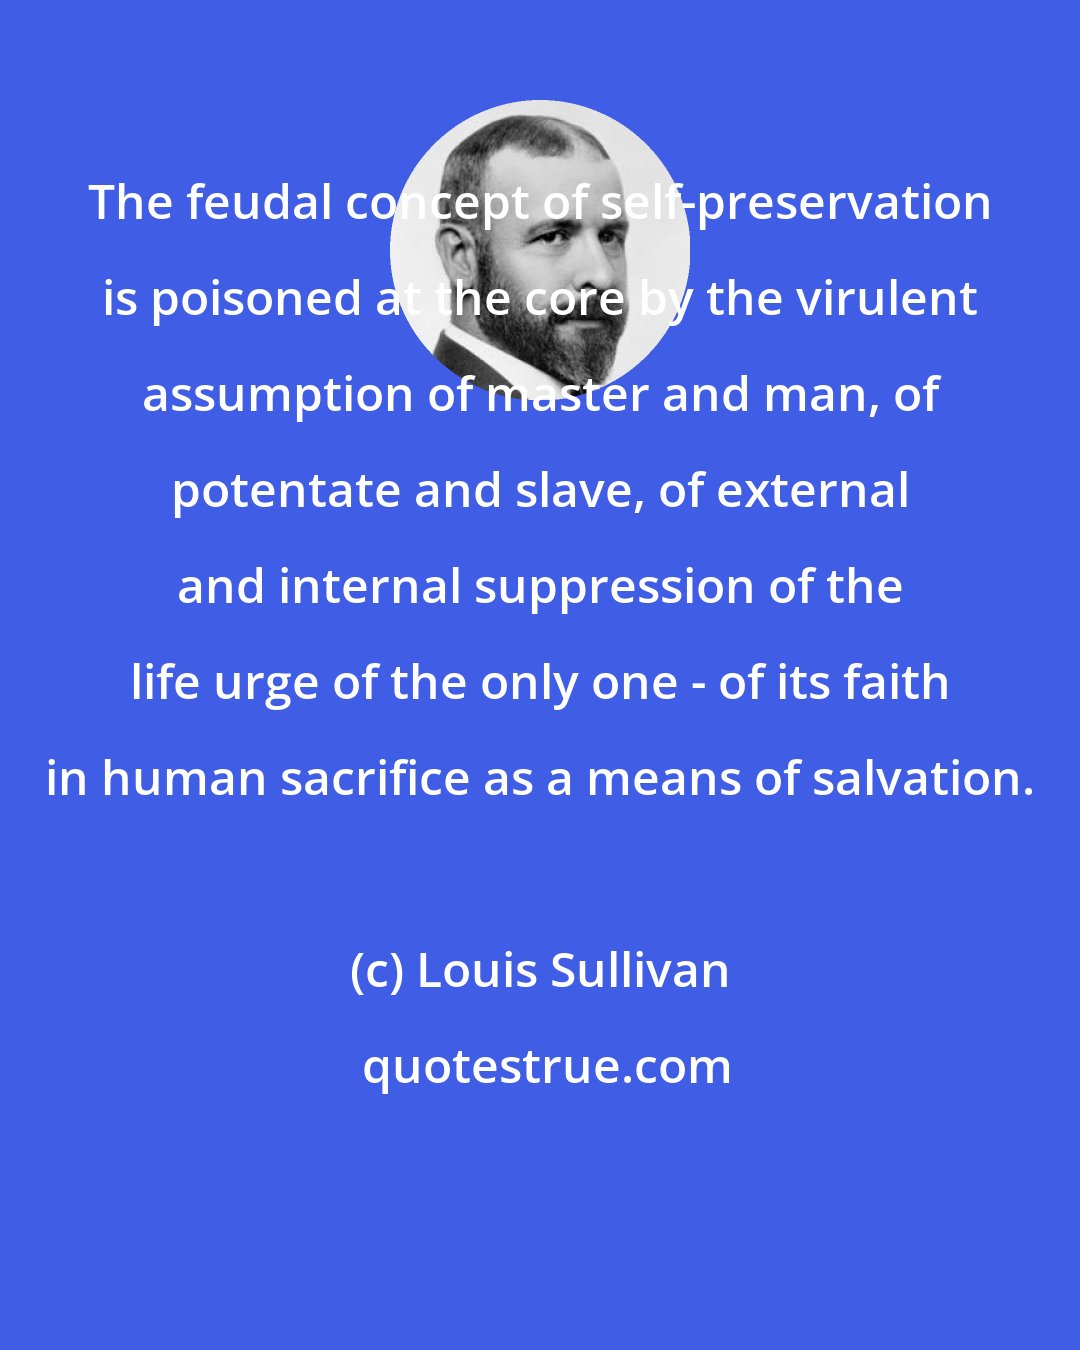 Louis Sullivan: The feudal concept of self-preservation is poisoned at the core by the virulent assumption of master and man, of potentate and slave, of external and internal suppression of the life urge of the only one - of its faith in human sacrifice as a means of salvation.